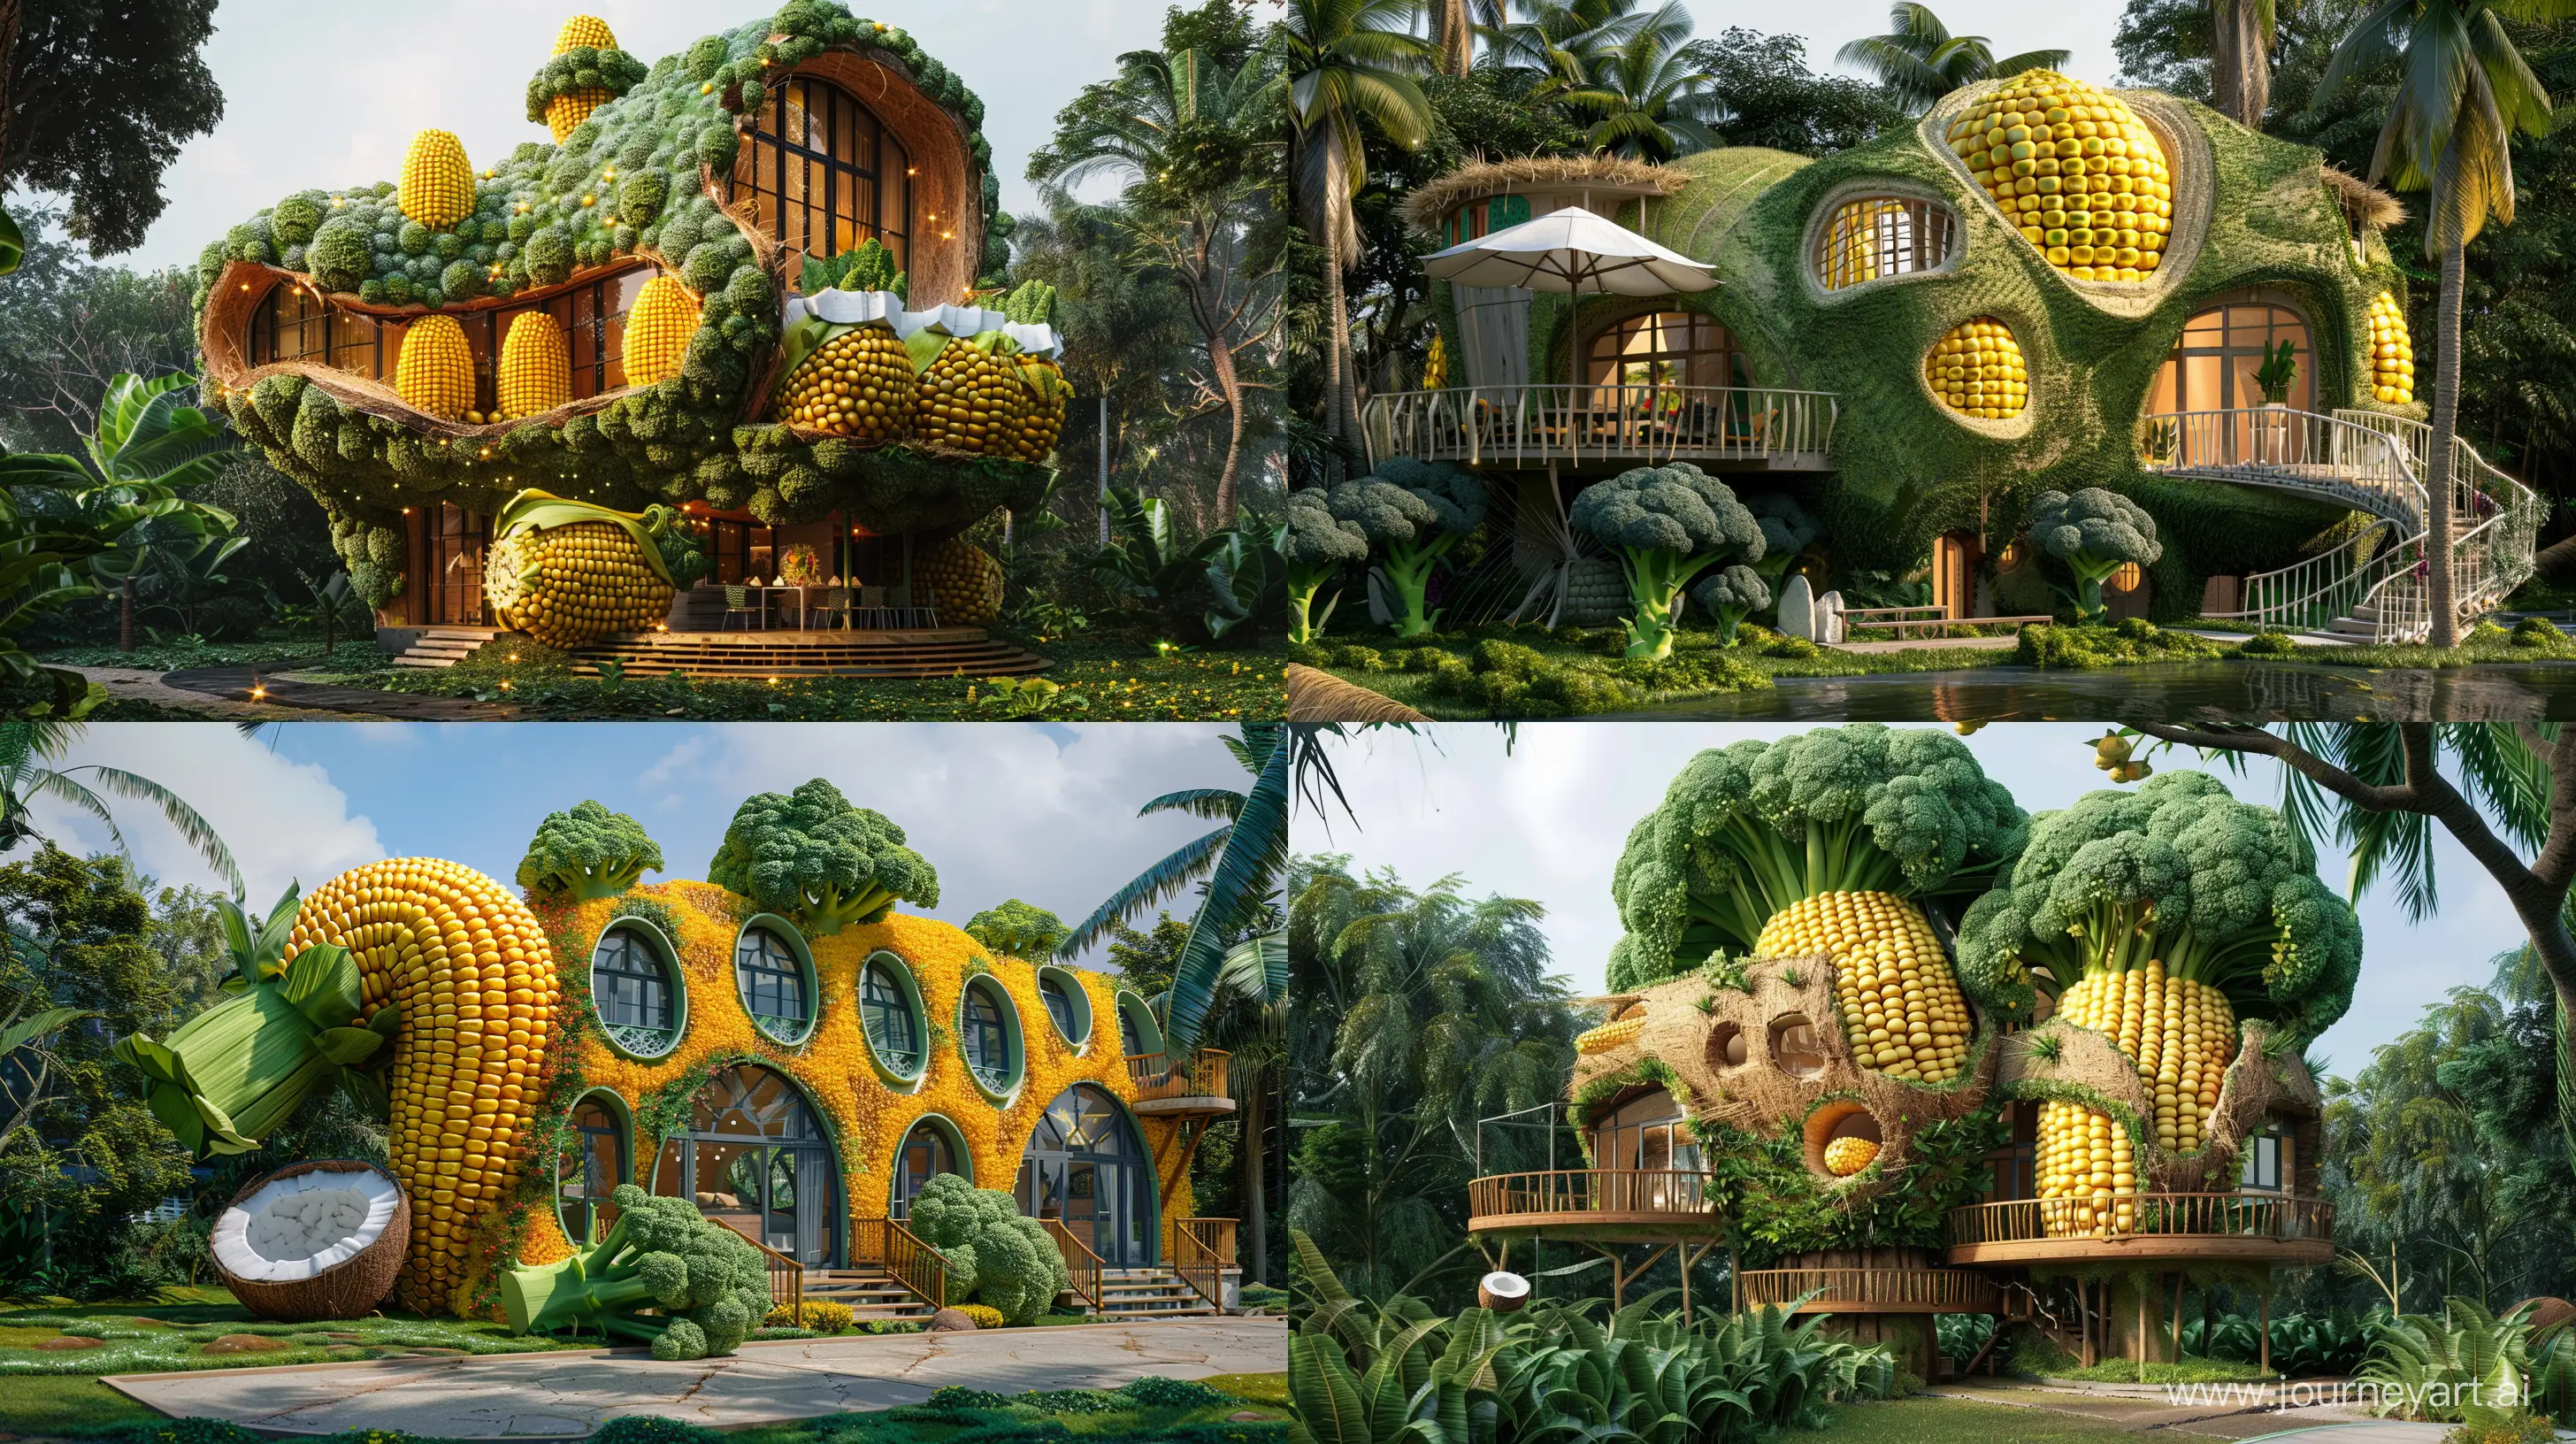 Extraterrestrial-Luxury-Living-Corn-Coconut-and-Broccolishaped-House-in-the-Galactic-Aesthetic-Fantasy